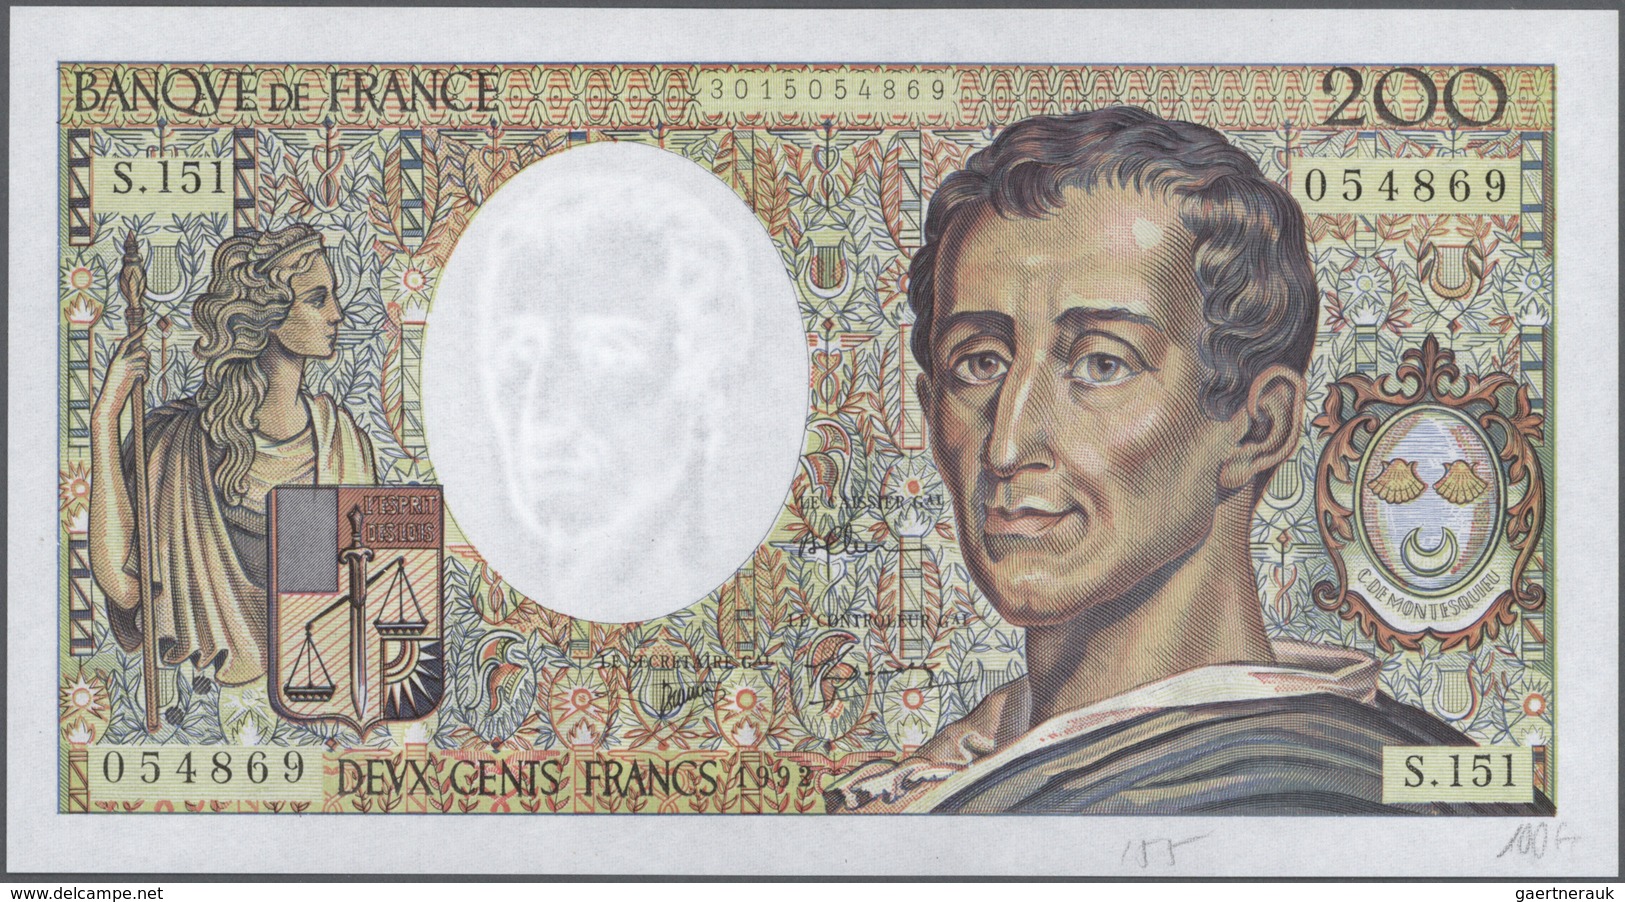 France / Frankreich: very big lot of about 2000 banknotes containing 12x 100 Francs P. 71, 31x 100 F